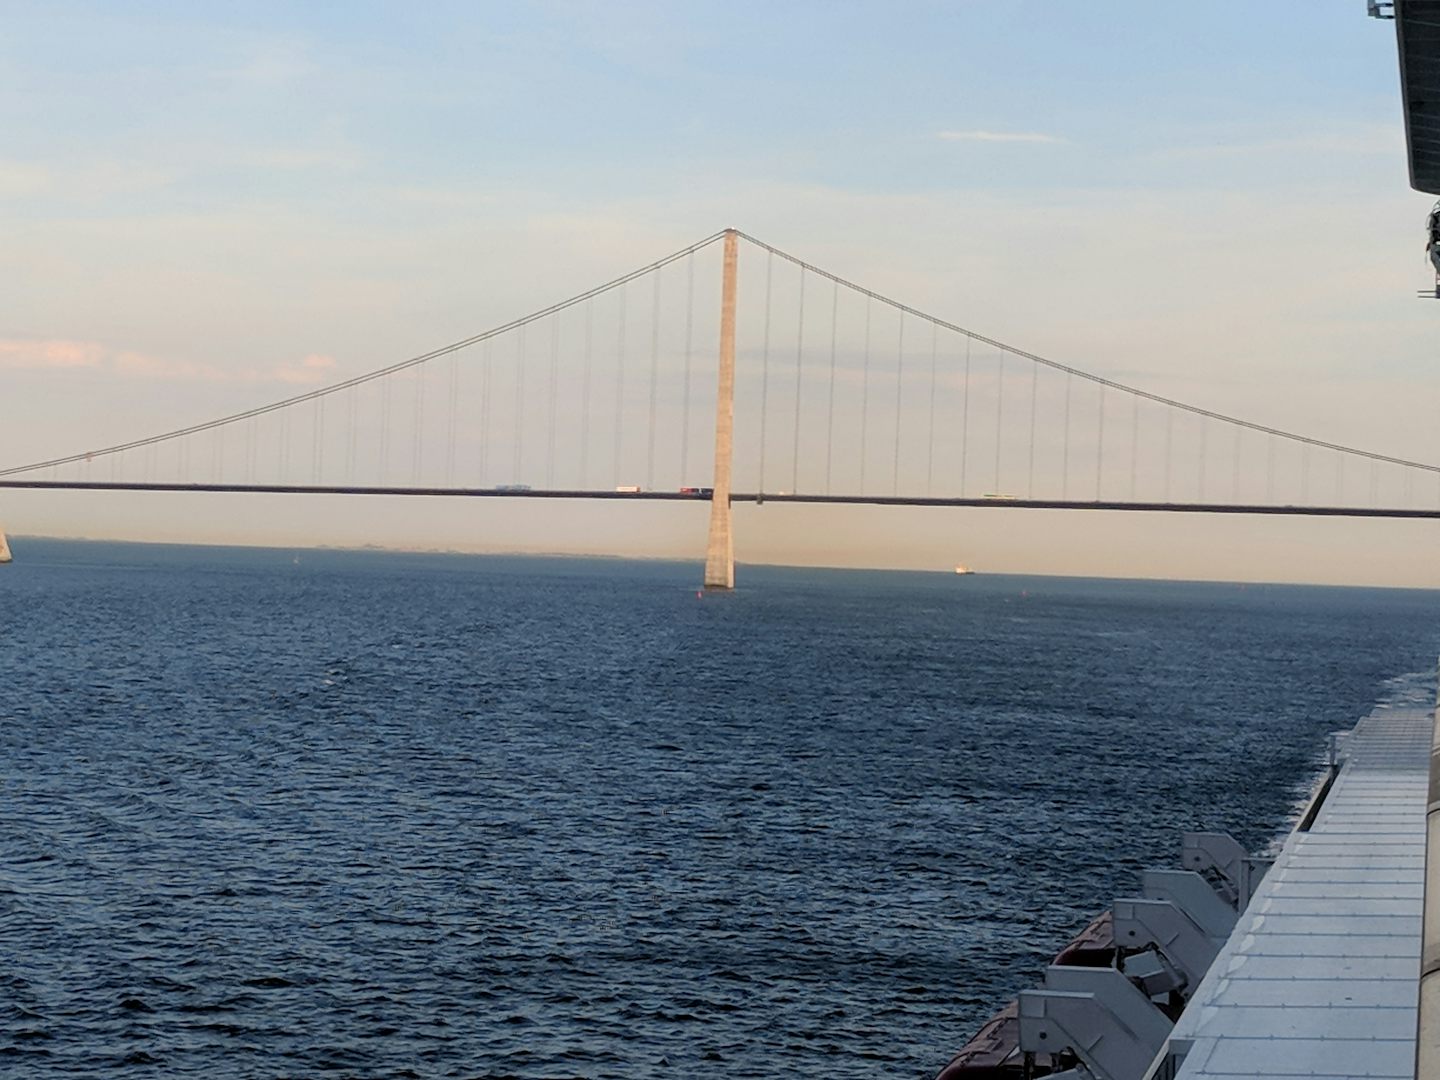 We think this is the Oresund Bridge, but we couldn't see enough of it t